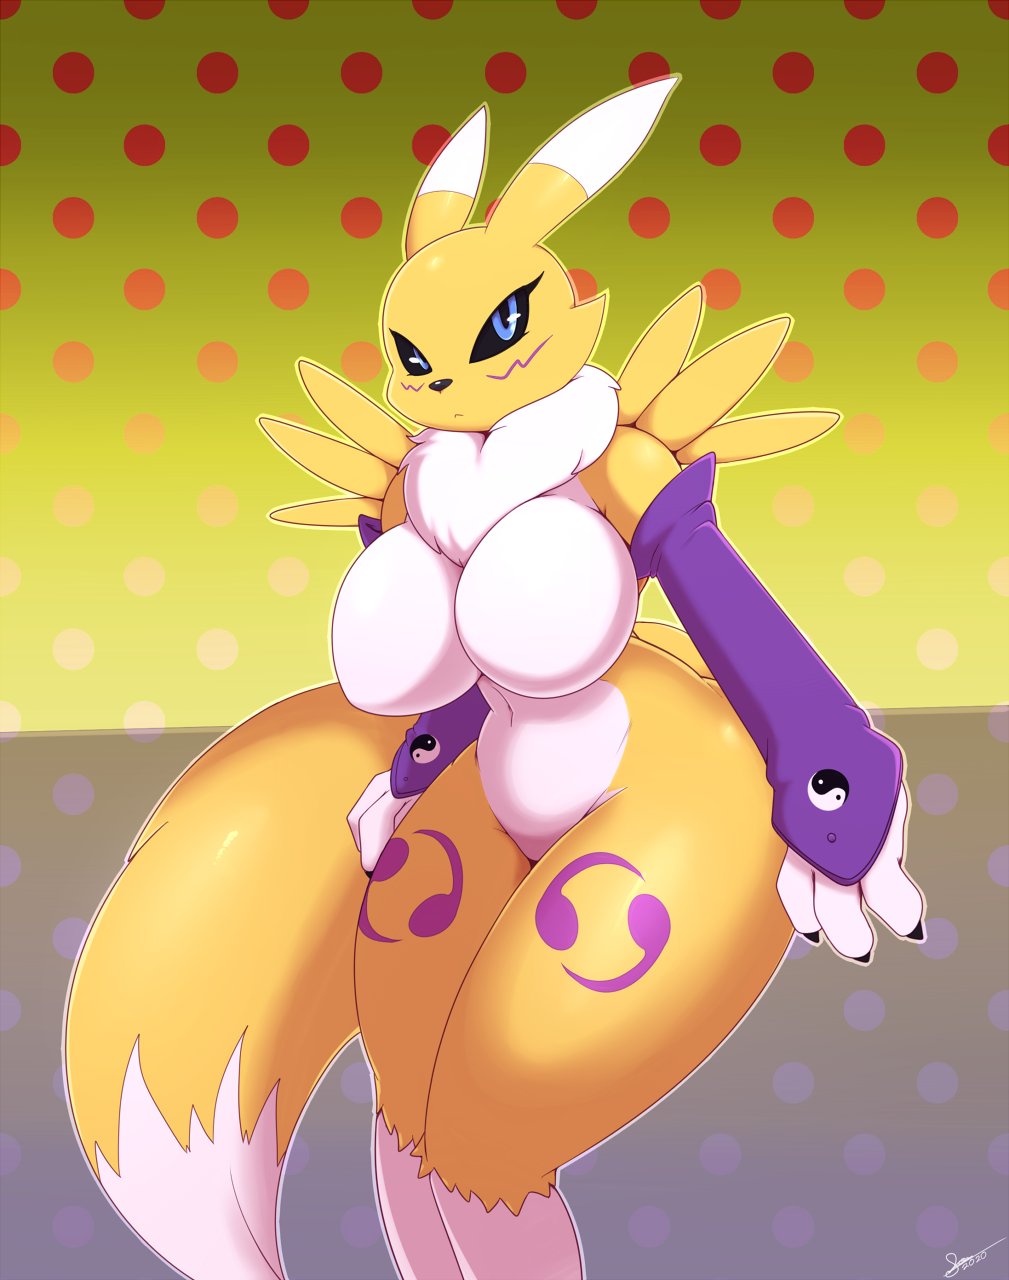 “✪ Patreon Pinups: Renamon ✪

Time to release one more of m...